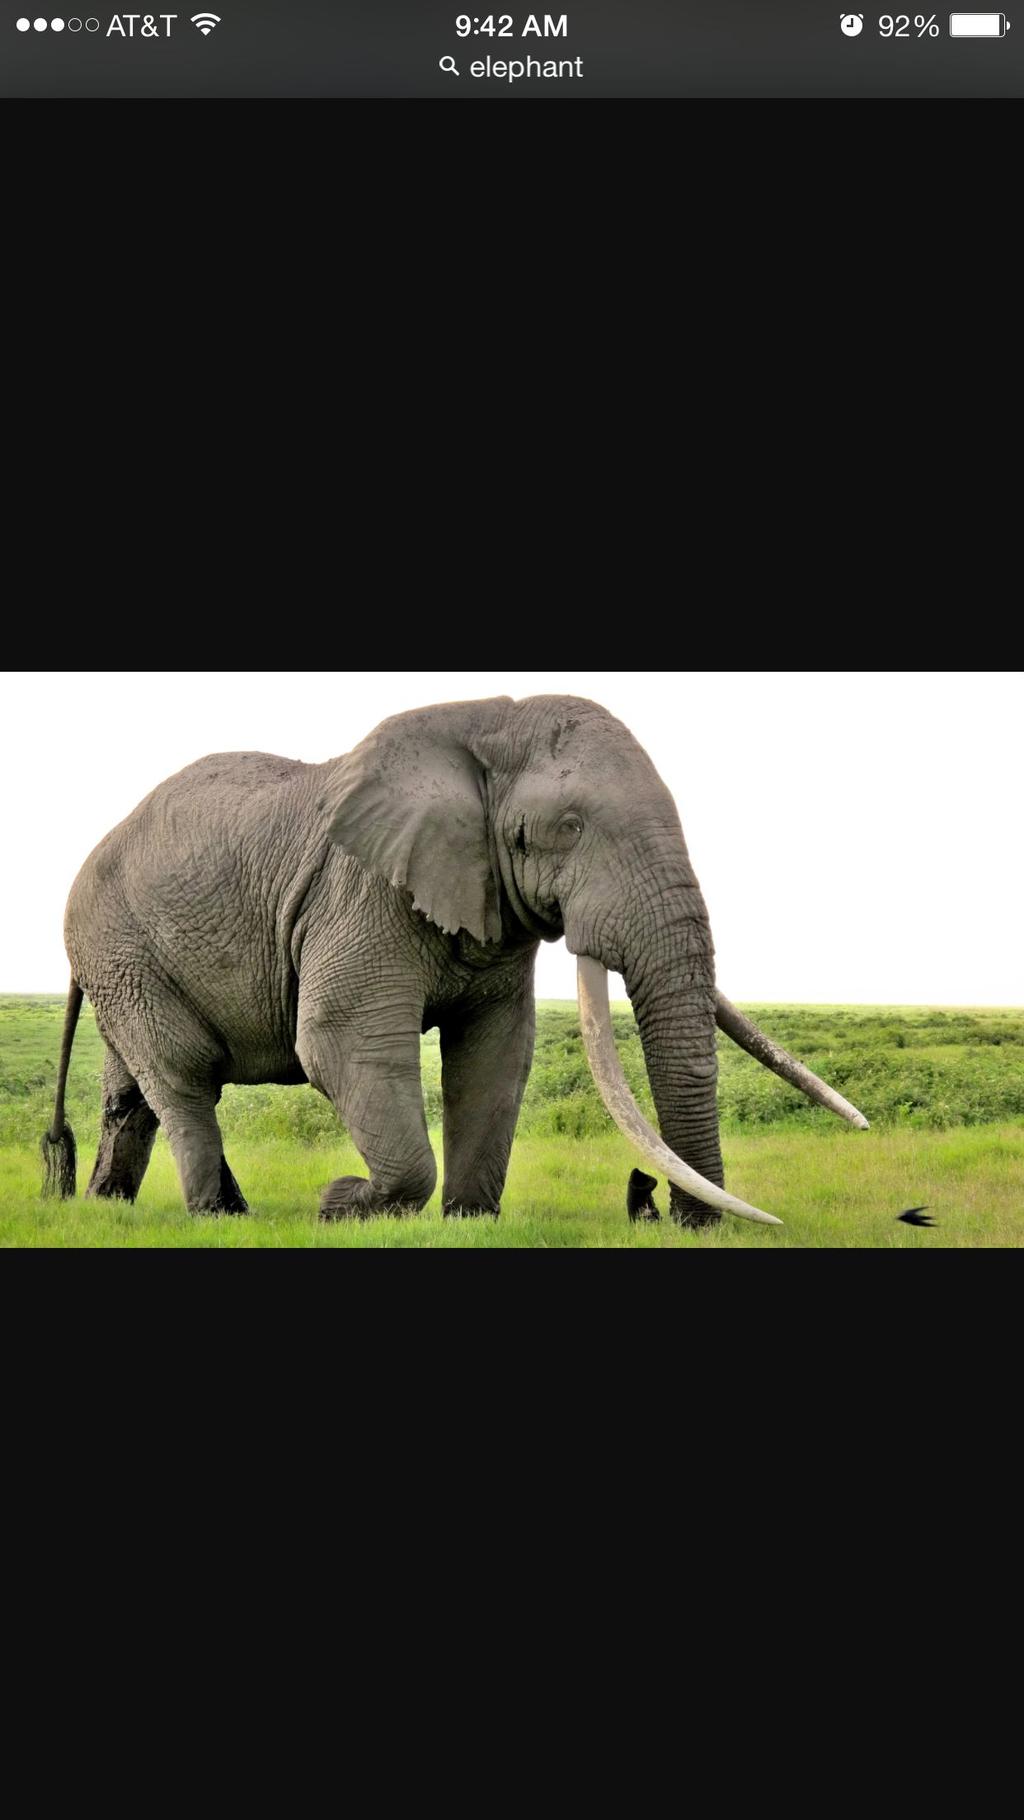 Elephants have this similar trait to humans.